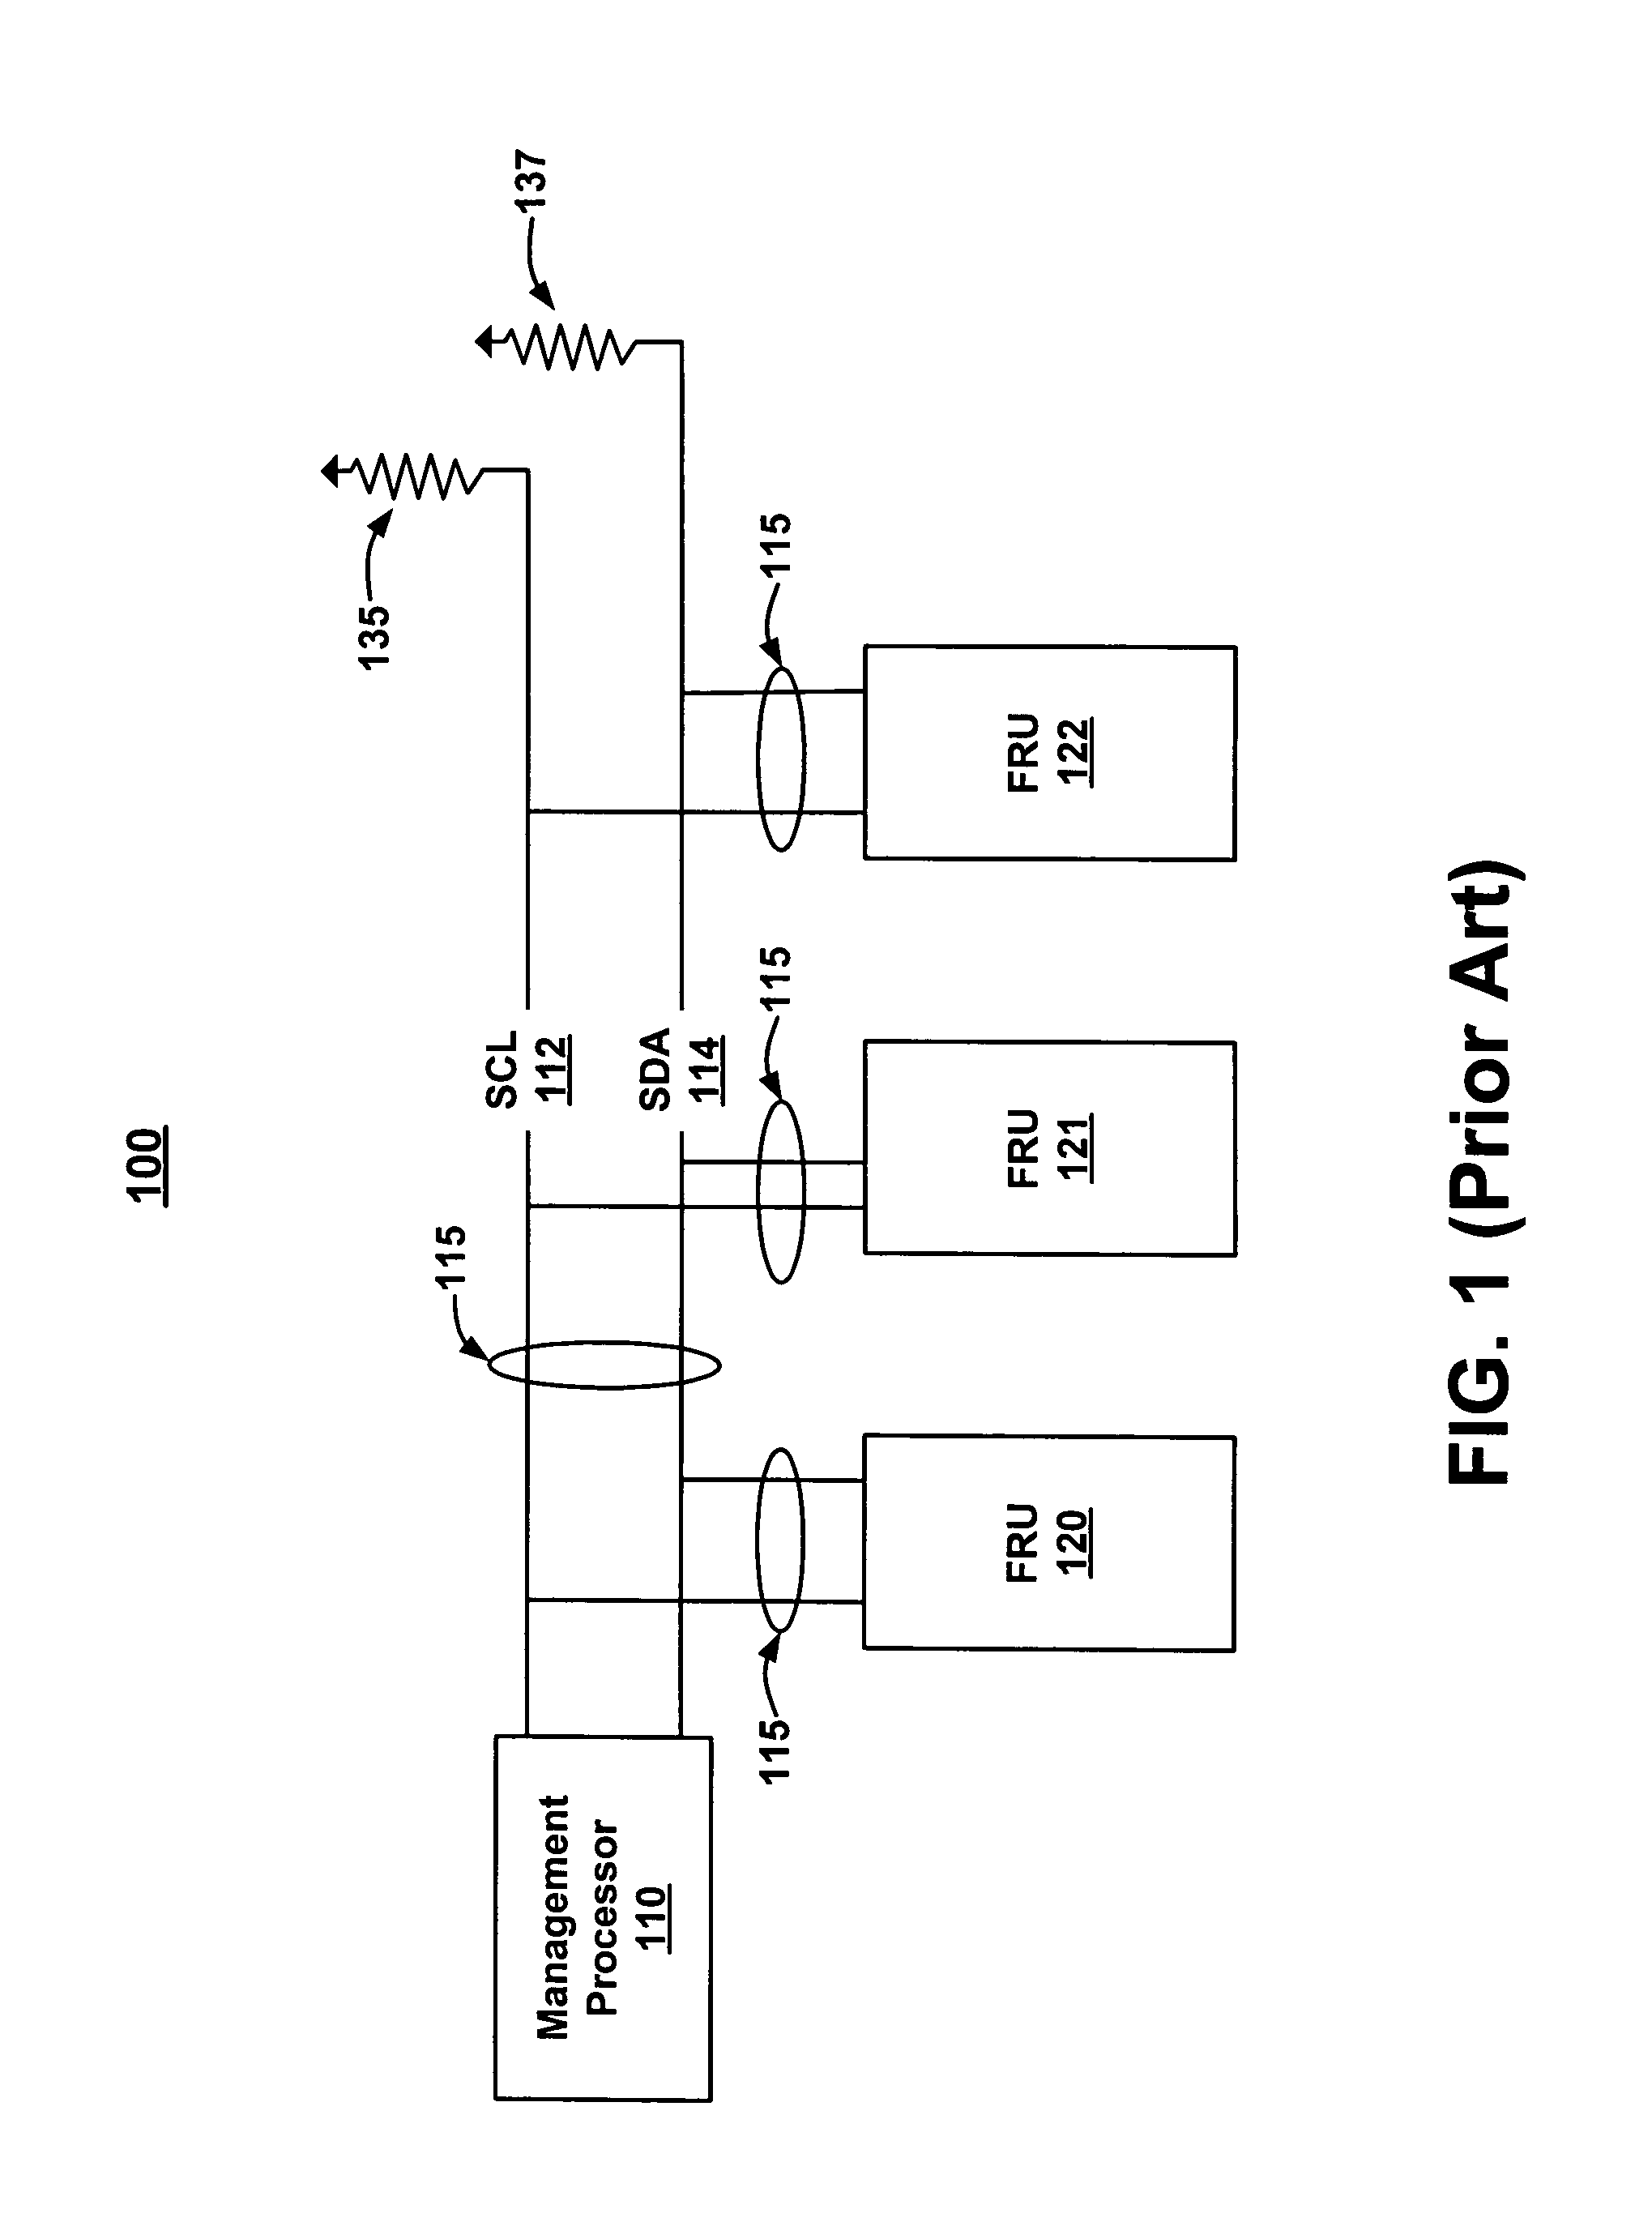 Inter integrated circuit bus router for preventing communication to an unauthorized port